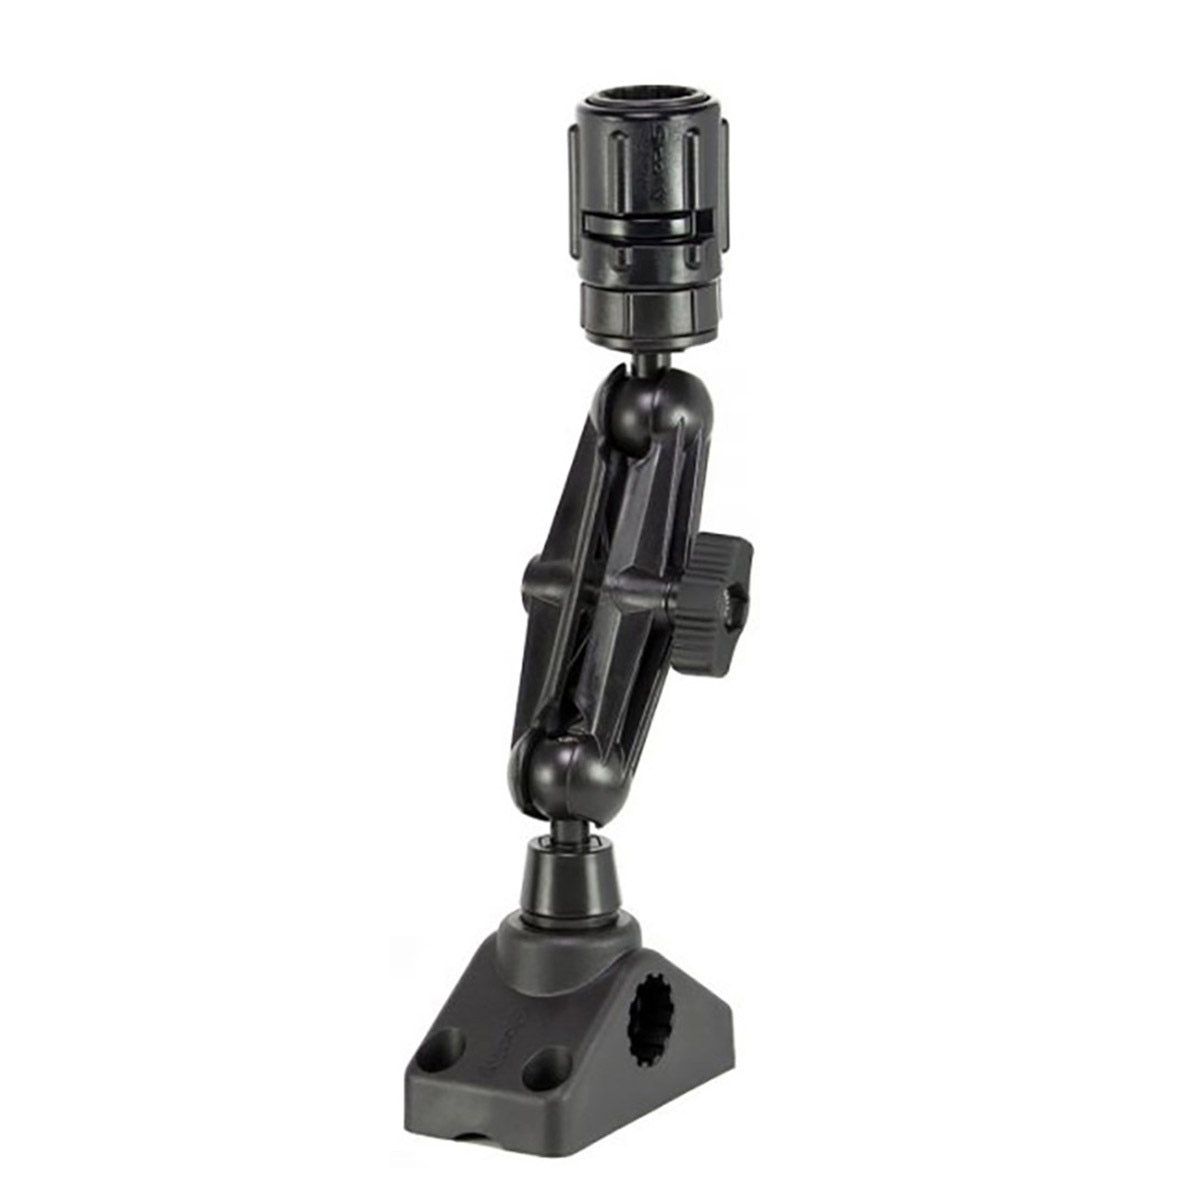 Scotty Ball Mounting System with GearHead Adapter Deck Mount